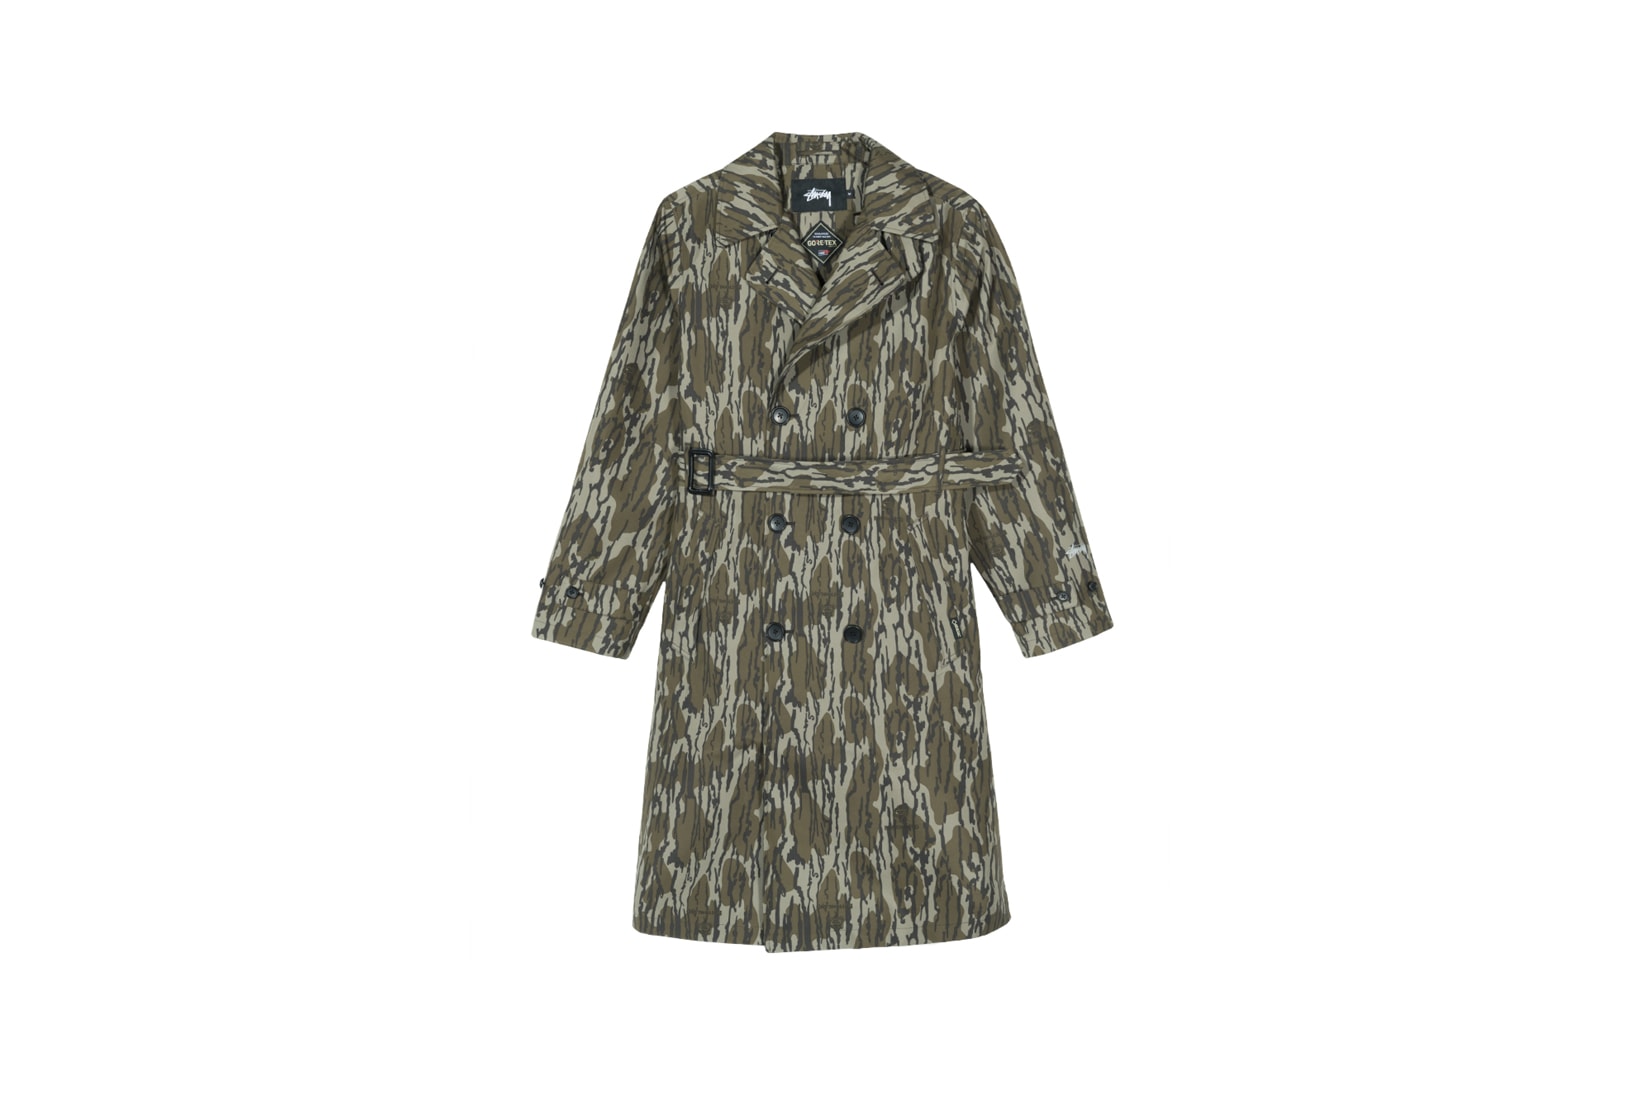 Stussy x GORE-TEX Trench Coat Camouflage